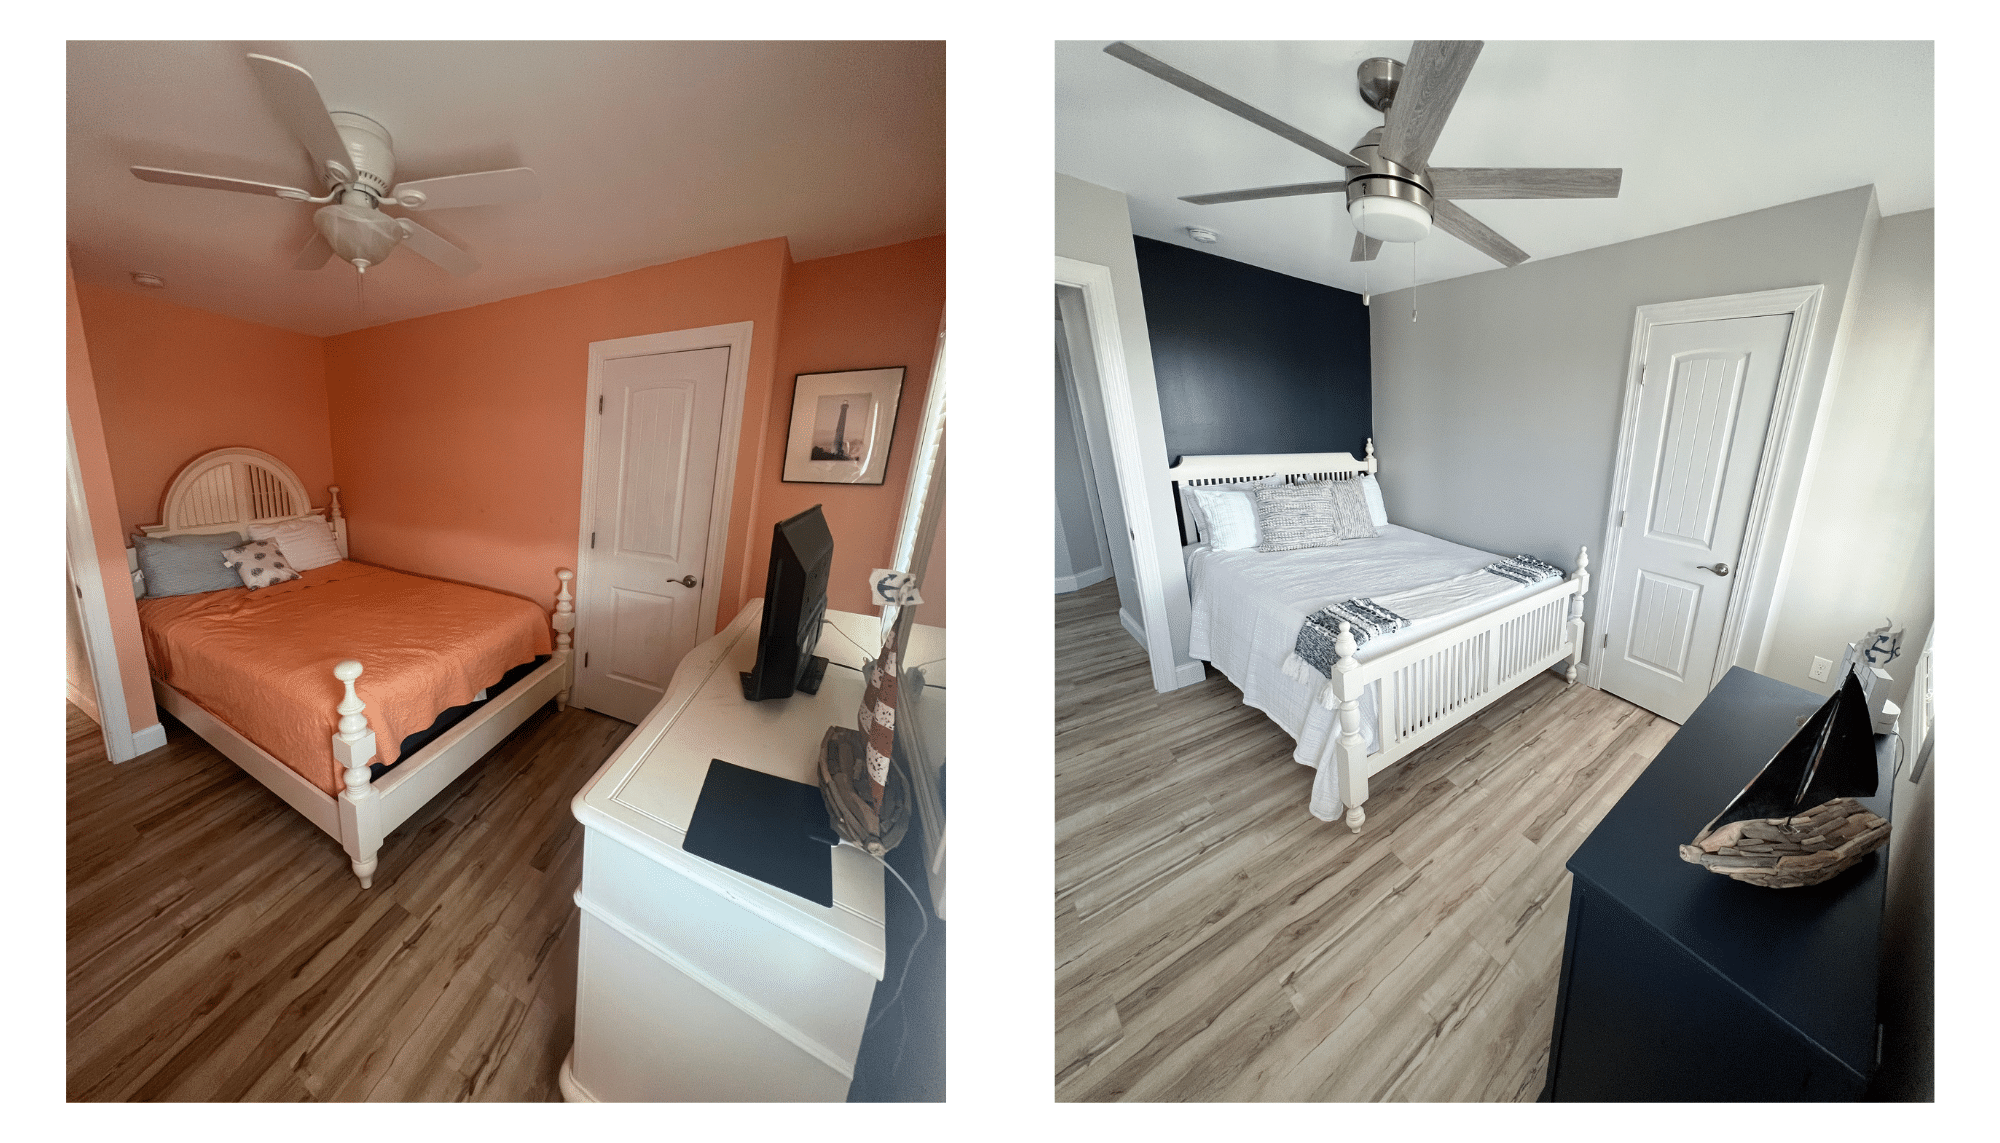 Beach Bedroom remodel, Anchors Awey Ocean Isle Beach Before and After, Beach House flip, Ocean isle beach, NC vacation rental, Stilettos and Diapers